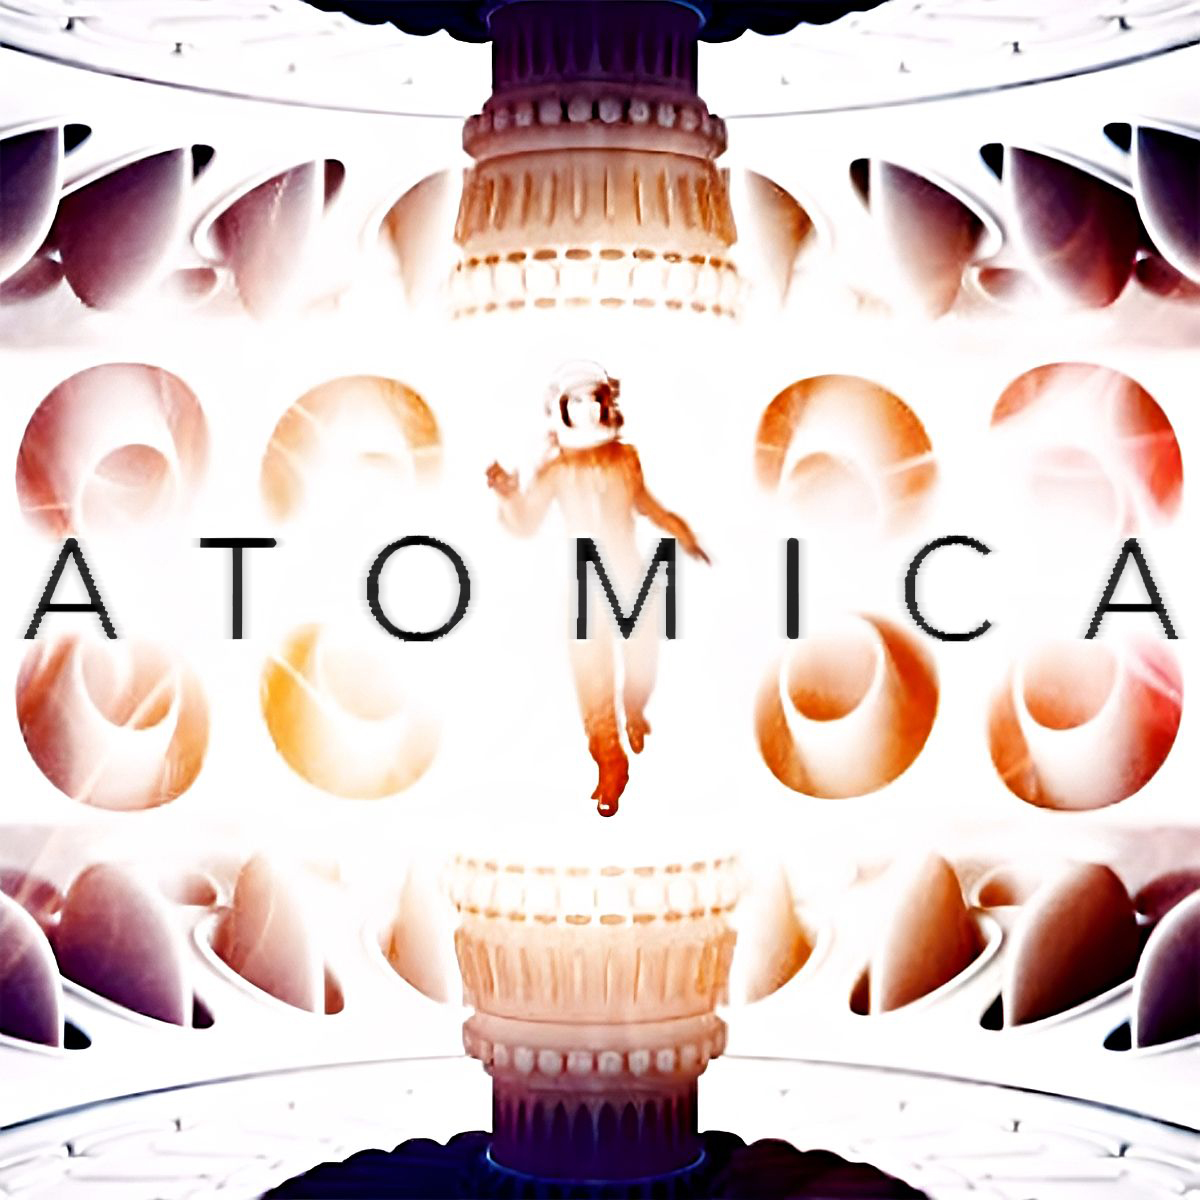 Atomica - In The Australian Desert Lies Mankind Future

#MOVIES #DagenMerrill #SarahHabel #DominicMonaghan #TomSizemore

READ MORE ON FABIOEMME.IT

fabioemme.it/2023/01/29/ato…